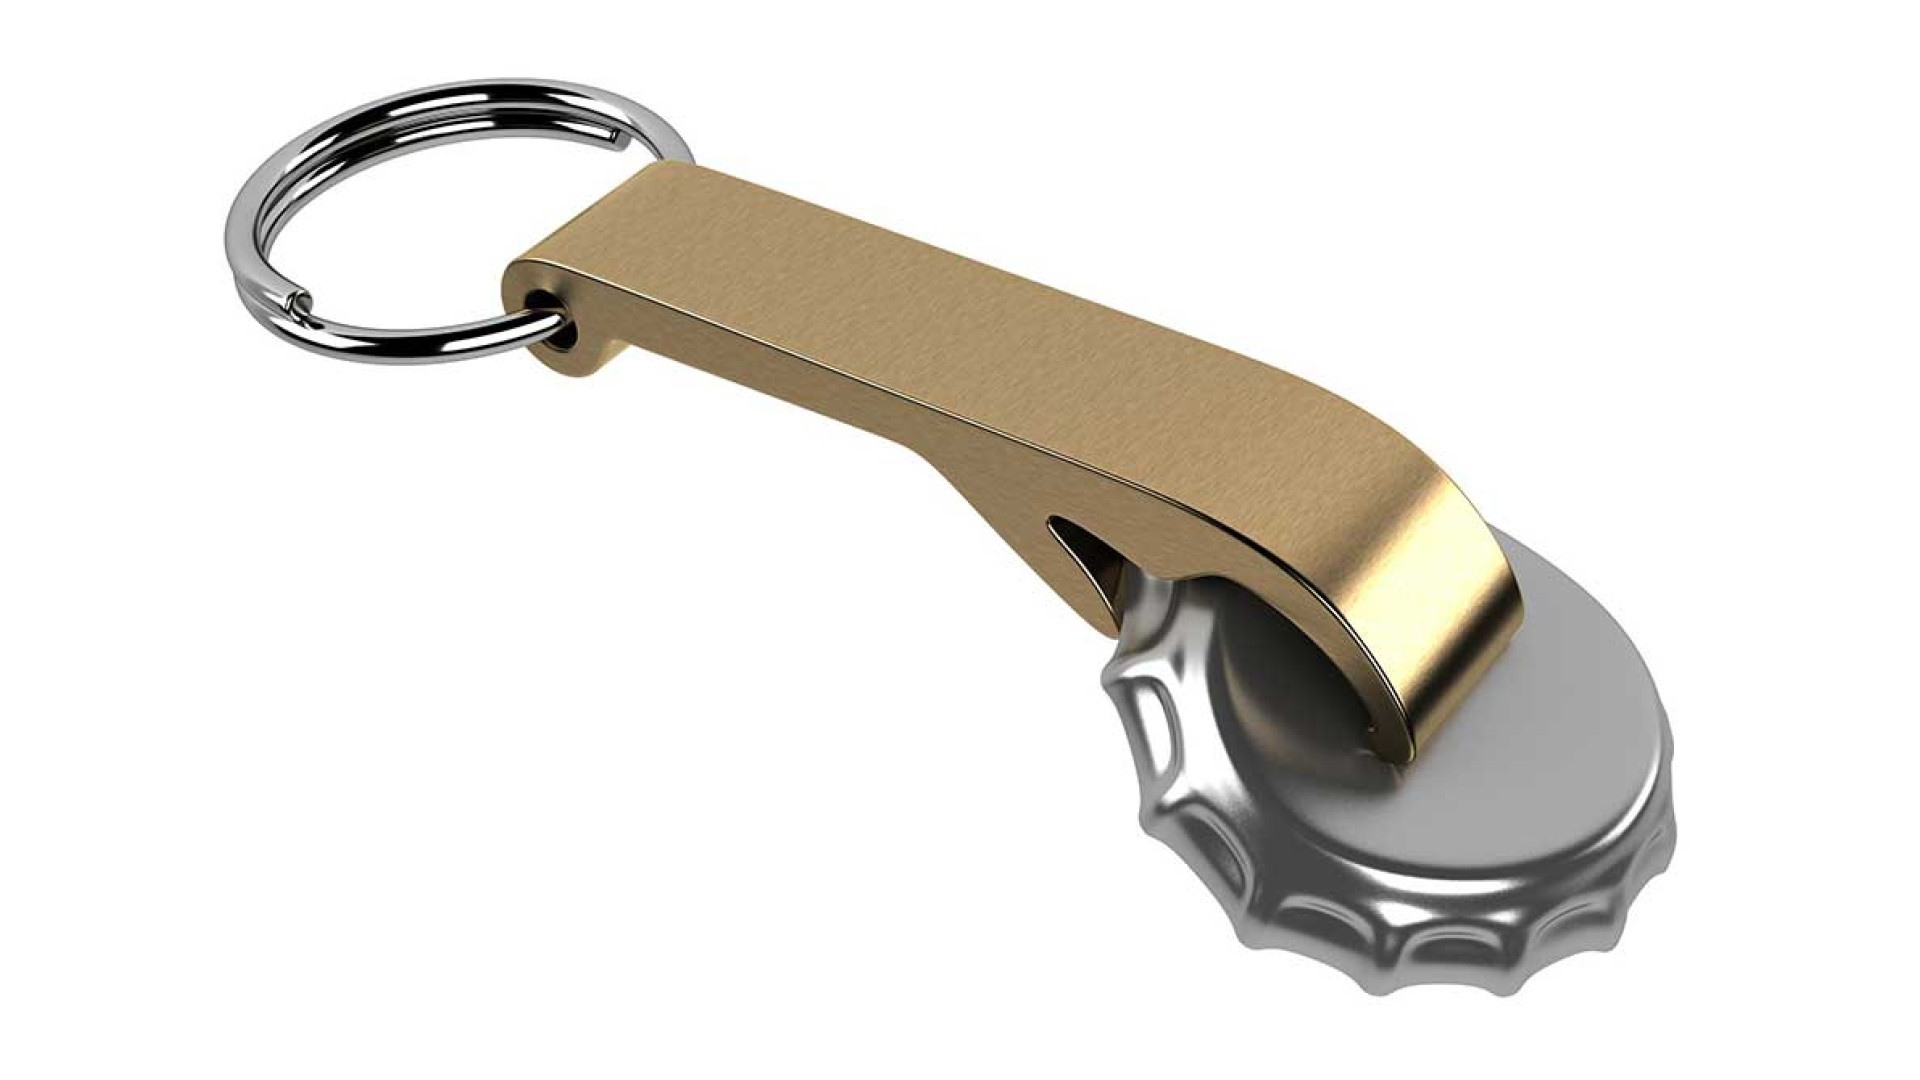 https://www.ckbproducts.com/image/cache/catalog/New%20Blog%20Images/four-benefits-of-stainless-steel-keychain-bottle-openers-for-marketing-1920x1080.jpeg